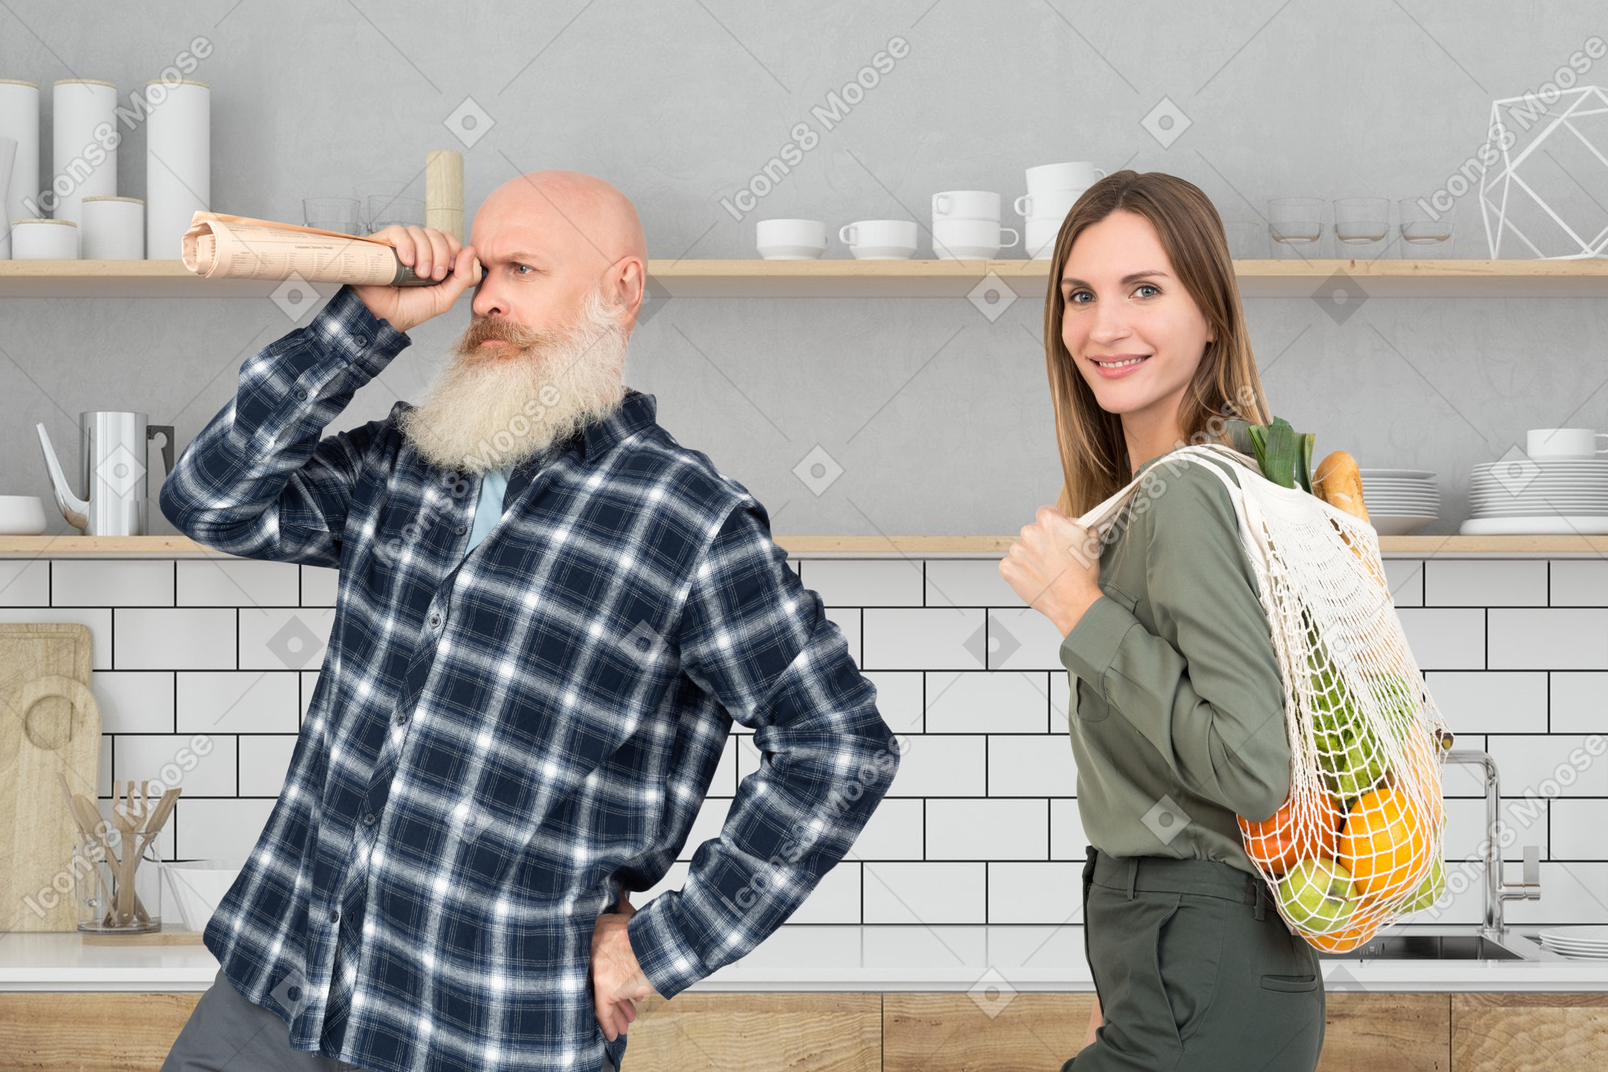 A man and a woman in the kitchen